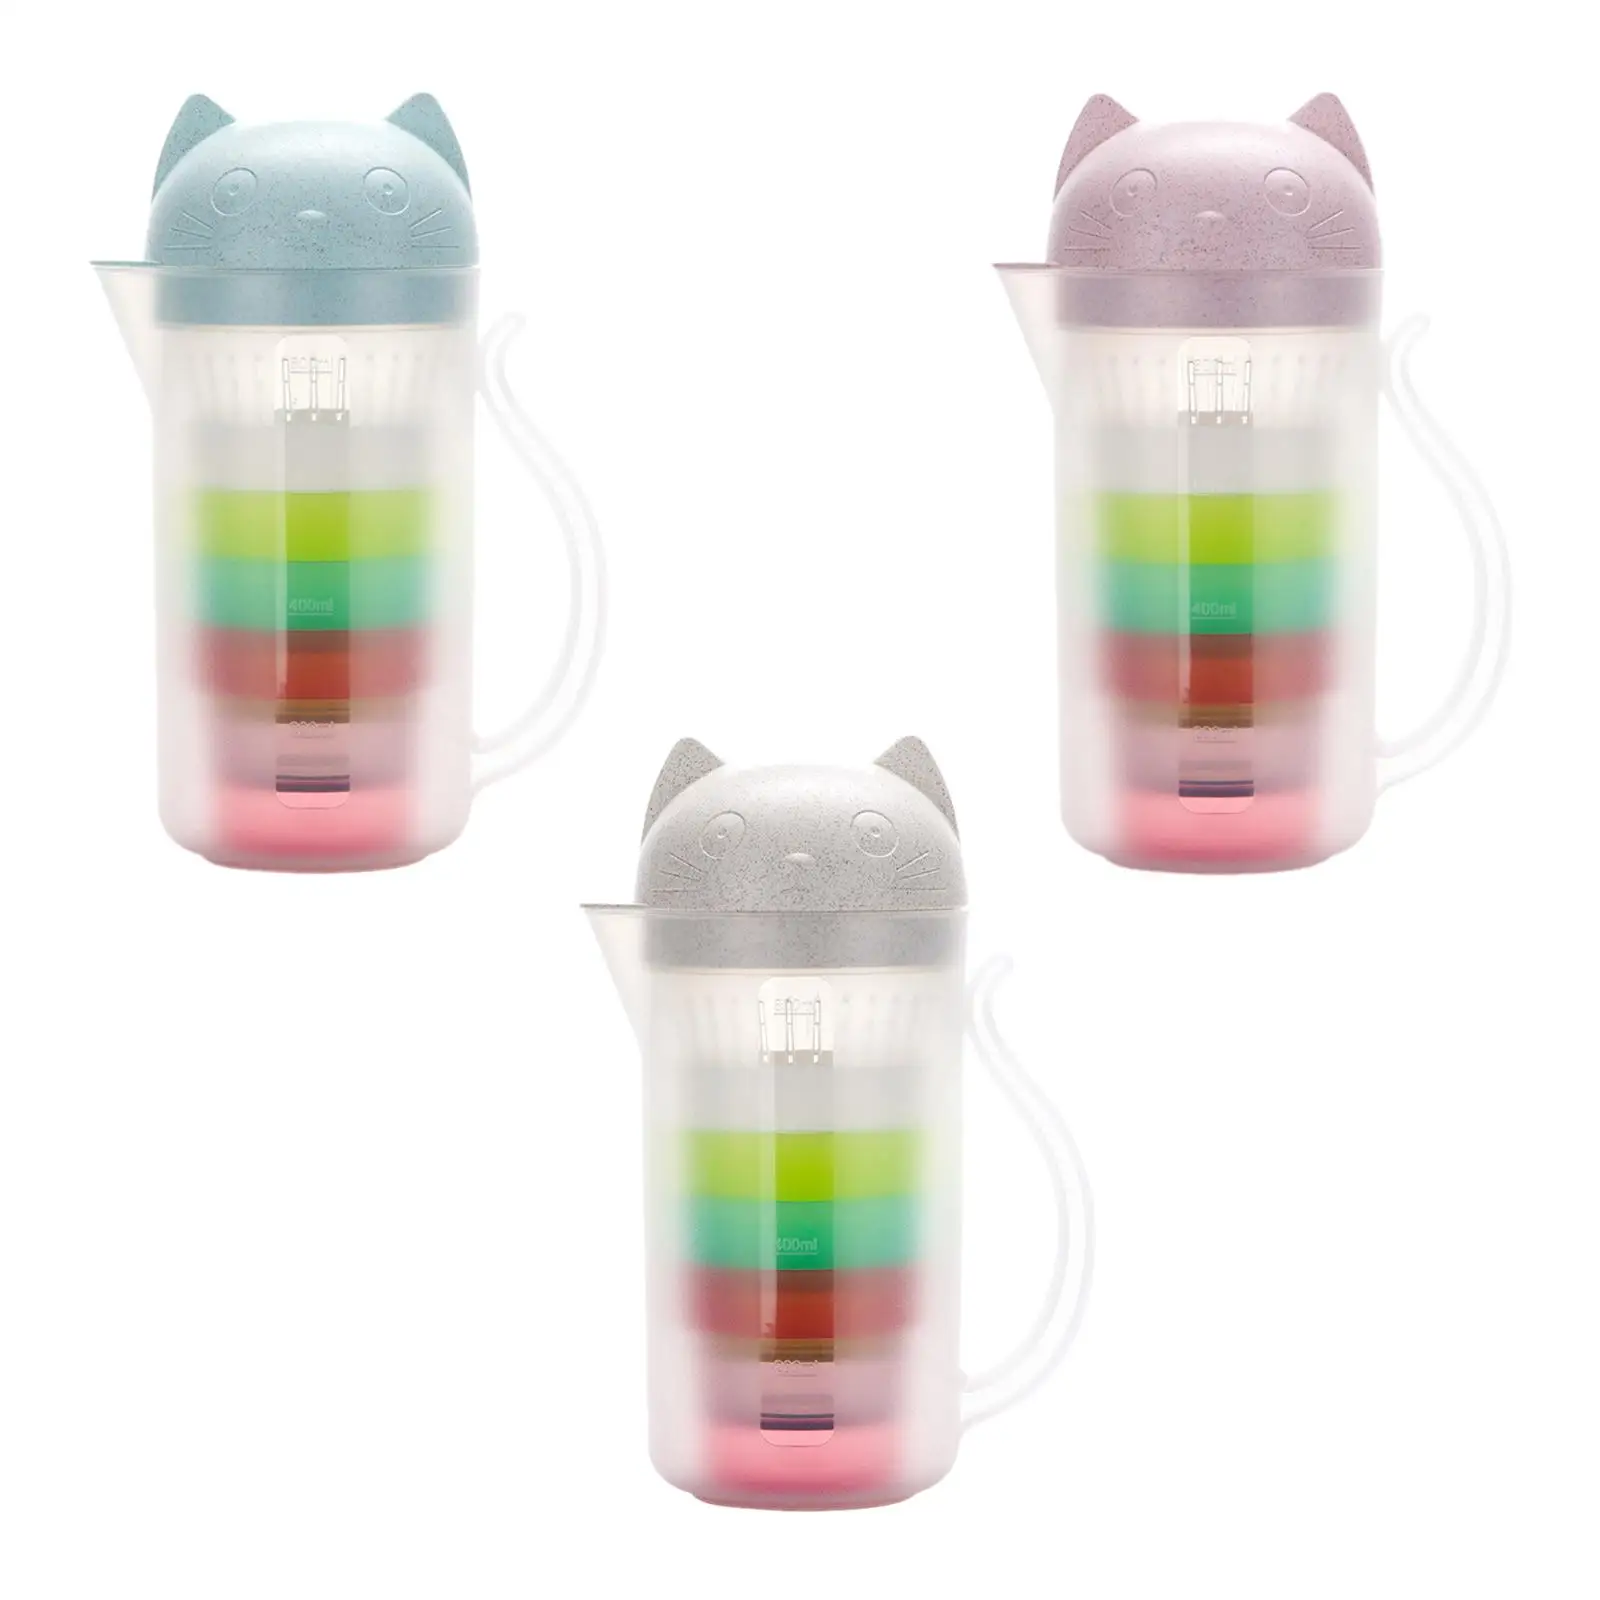 Water Pitcher with Lid Heat Resistant Cute Portable Beverage Serveware for Coffee Hot/Cold Water Milk Homemade Beverage Parties